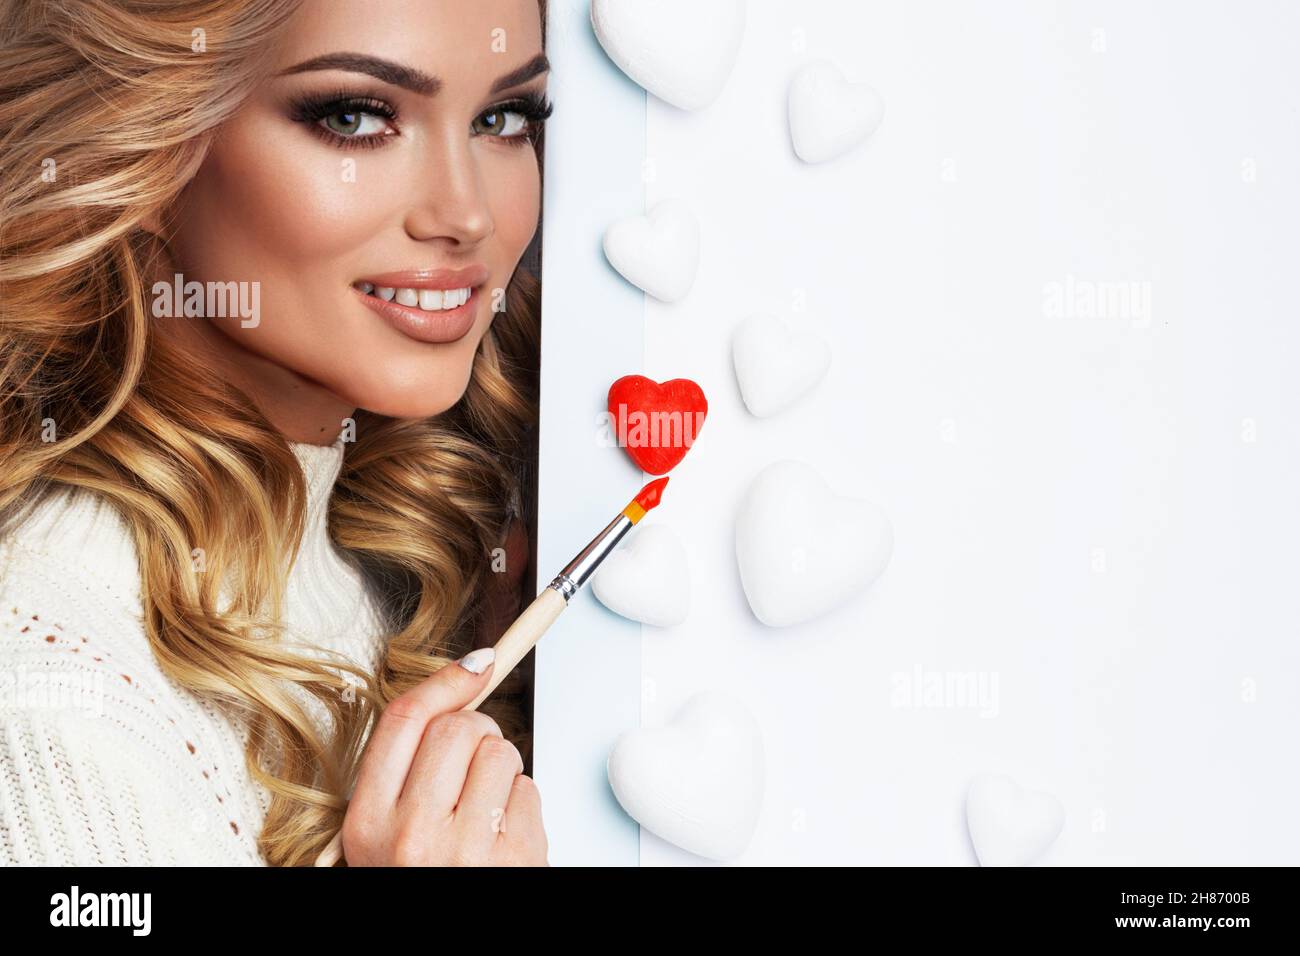 Beautiful young woman painting hearts with red paint Valentine day love concept Stock Photo